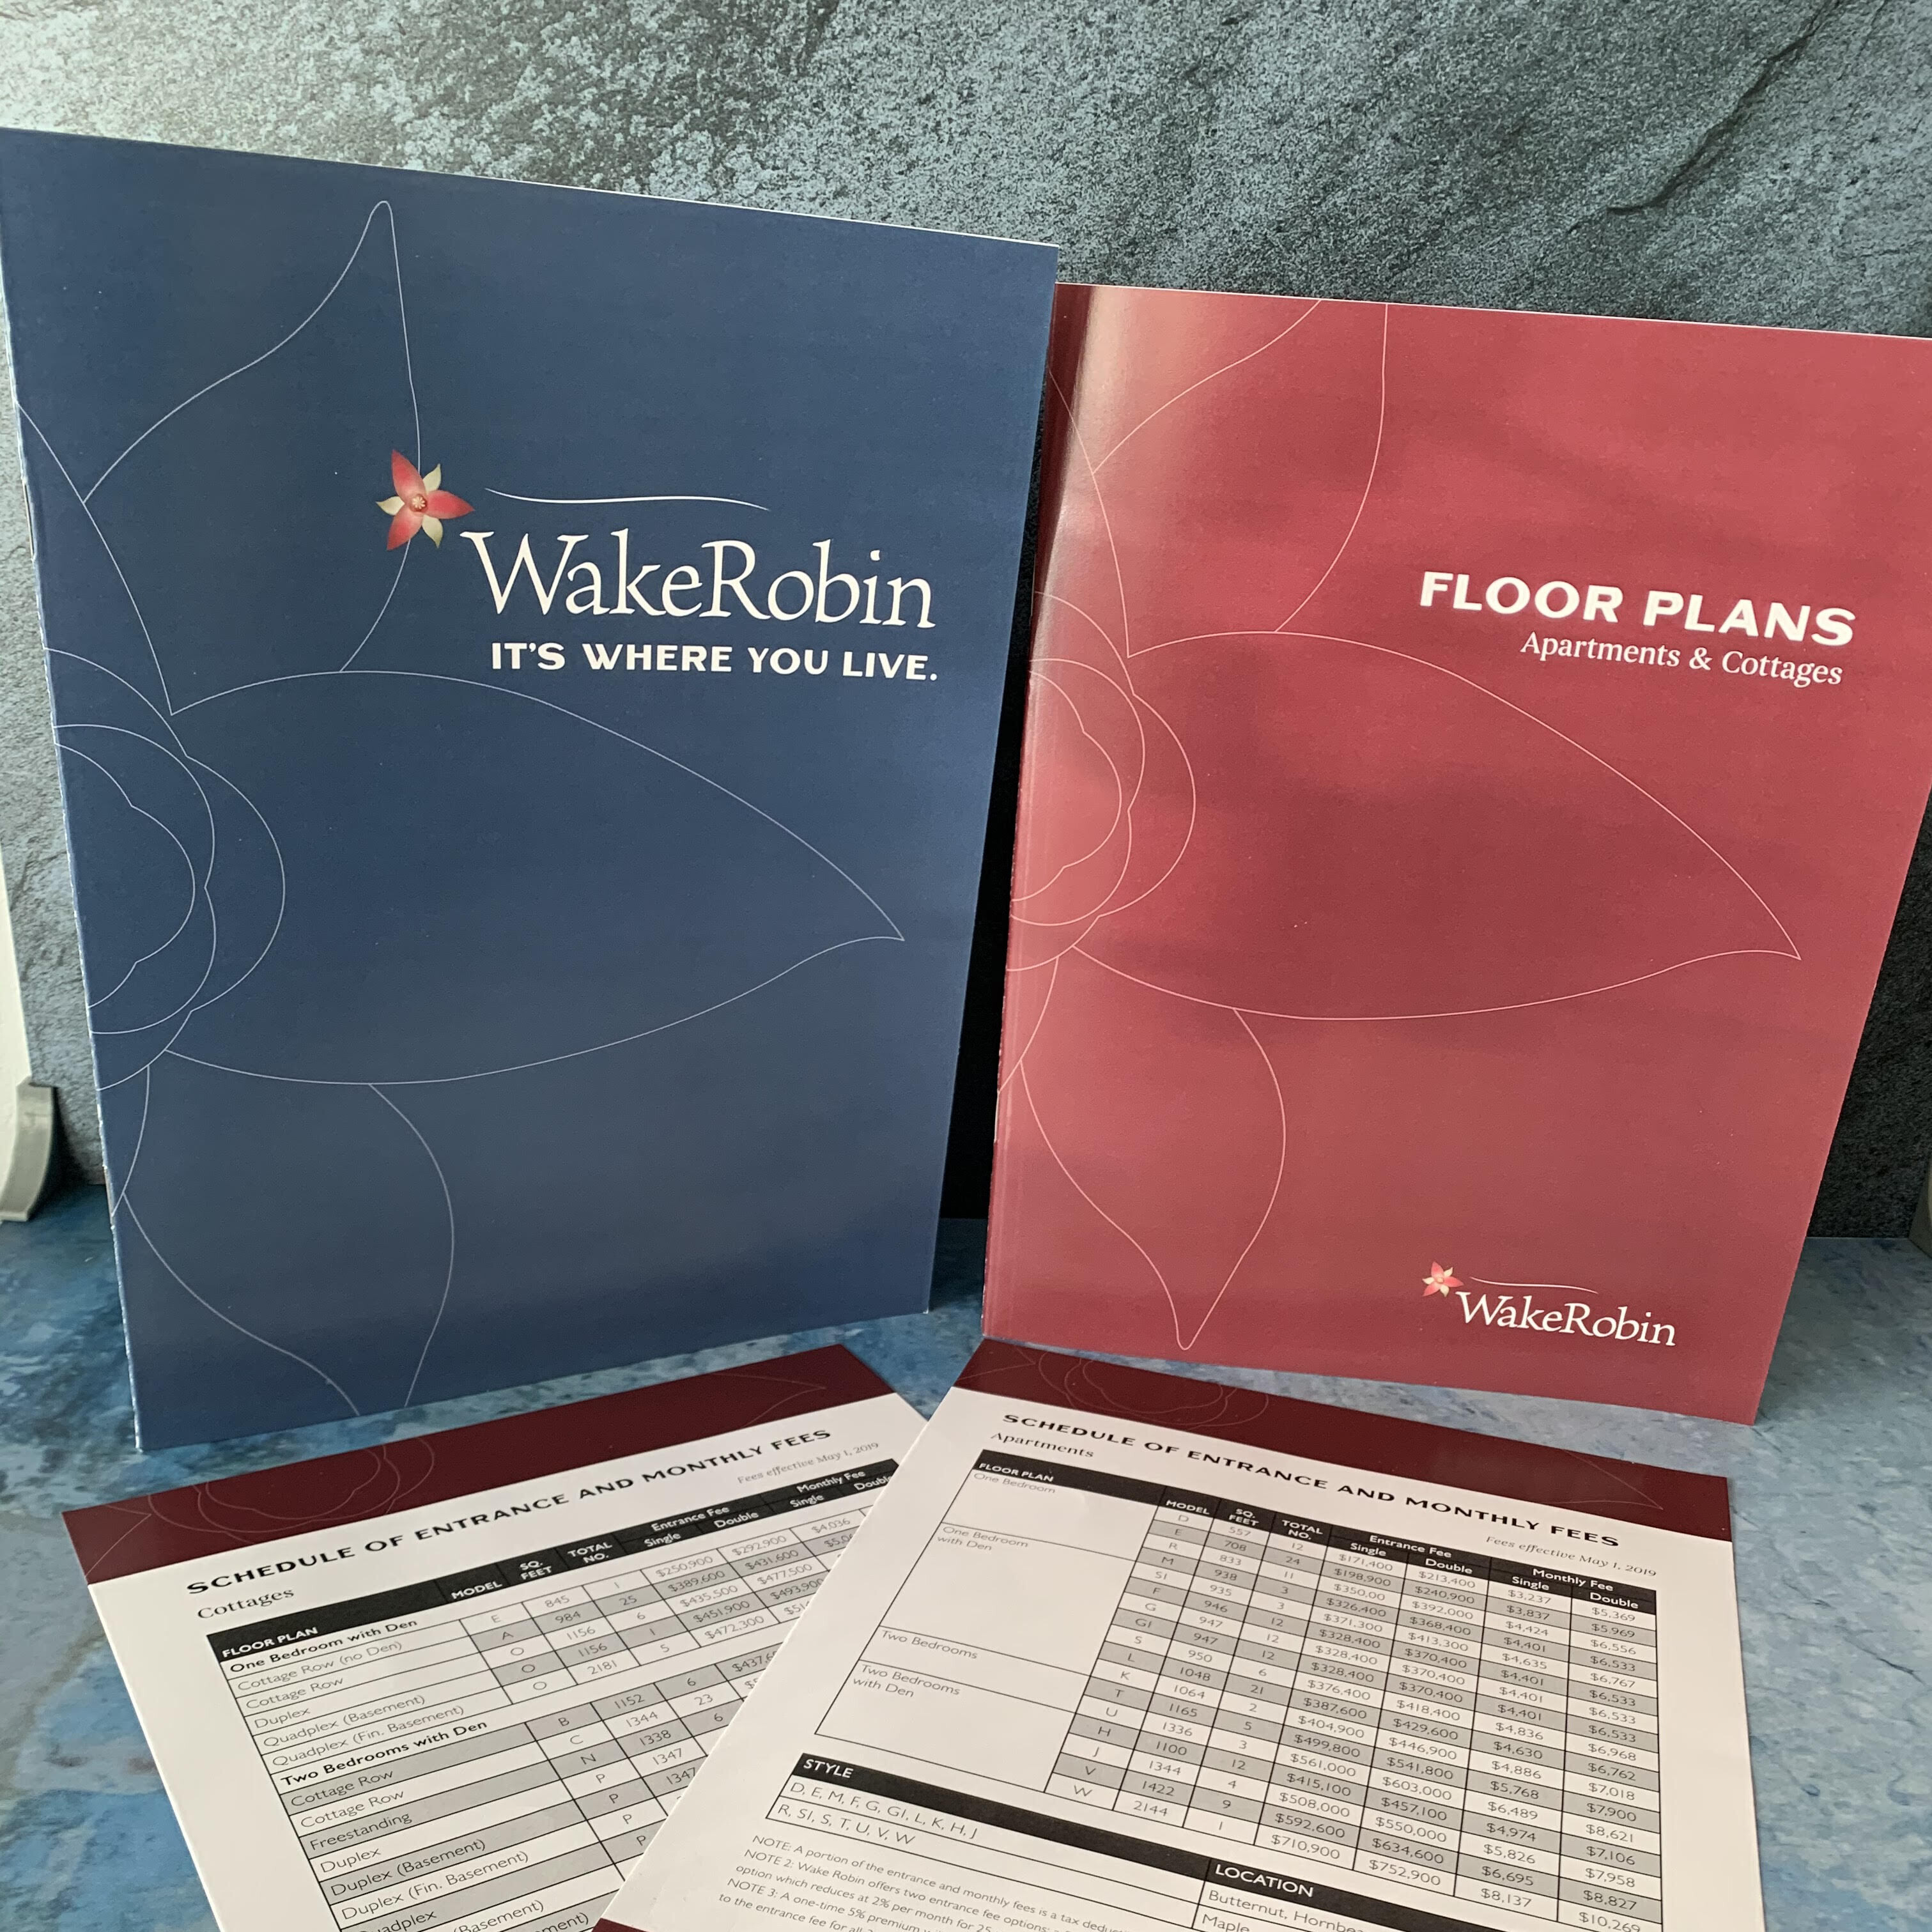 Booklets for WakeRobin